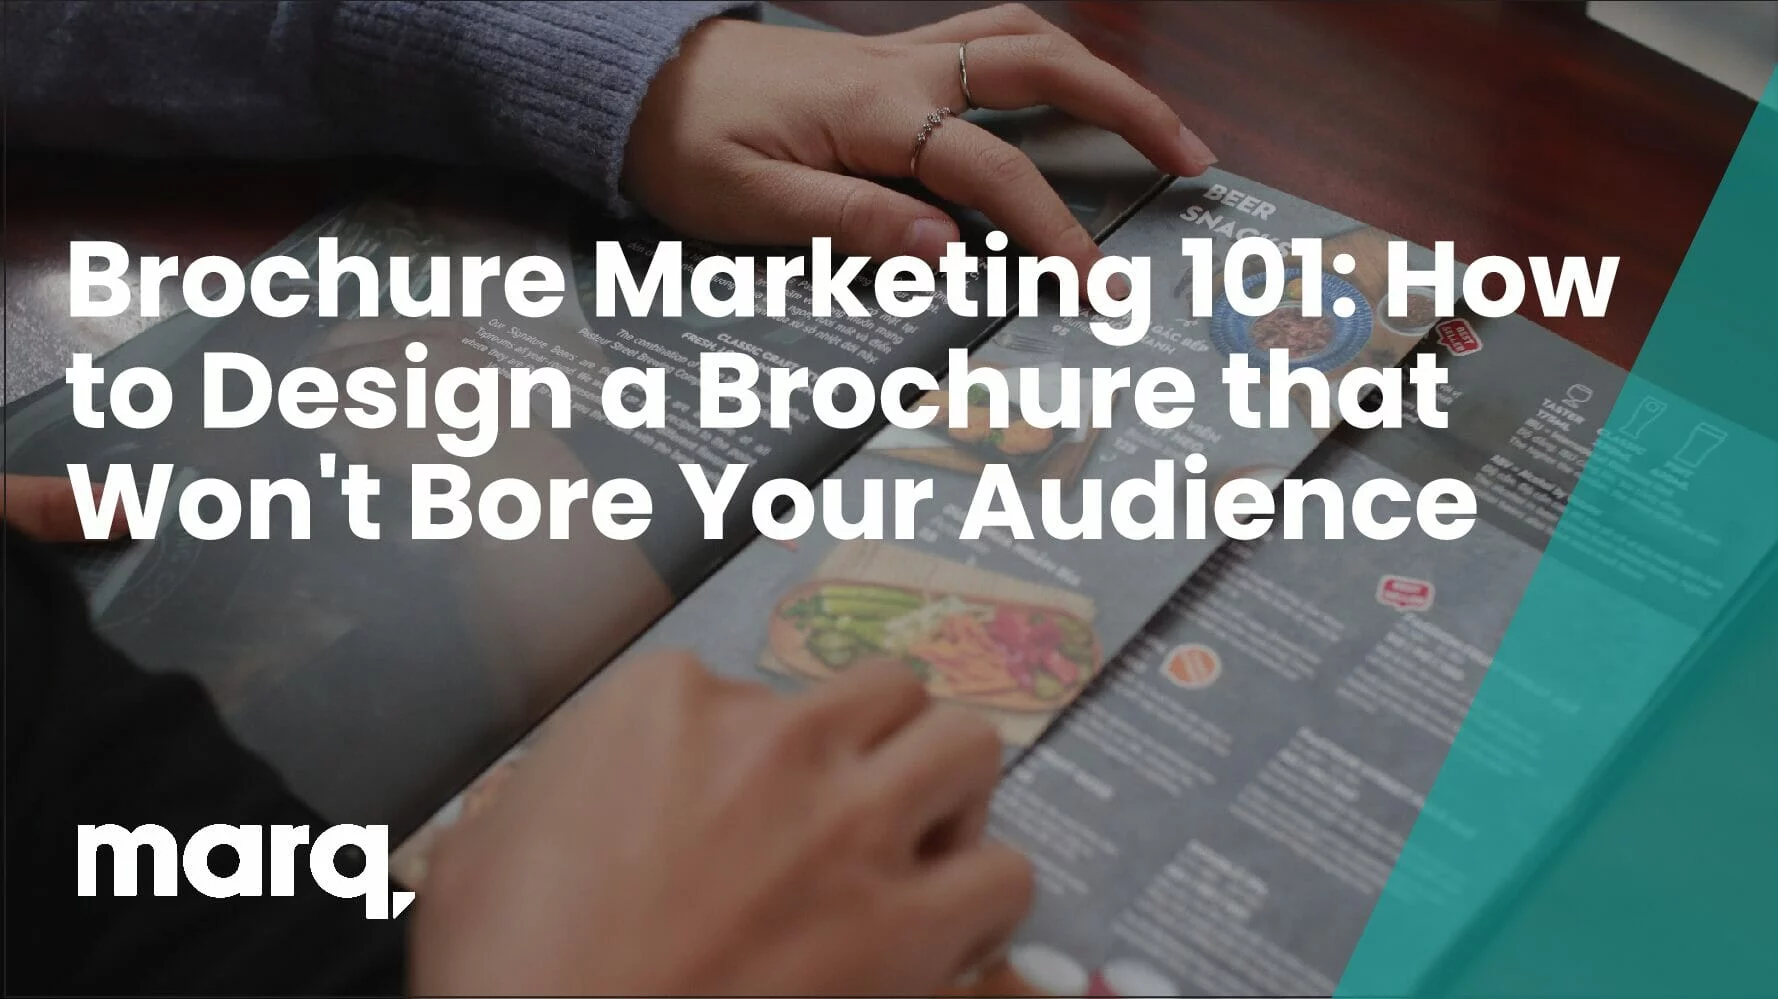 How to Design a Brochure that Won’t Bore Your Audience